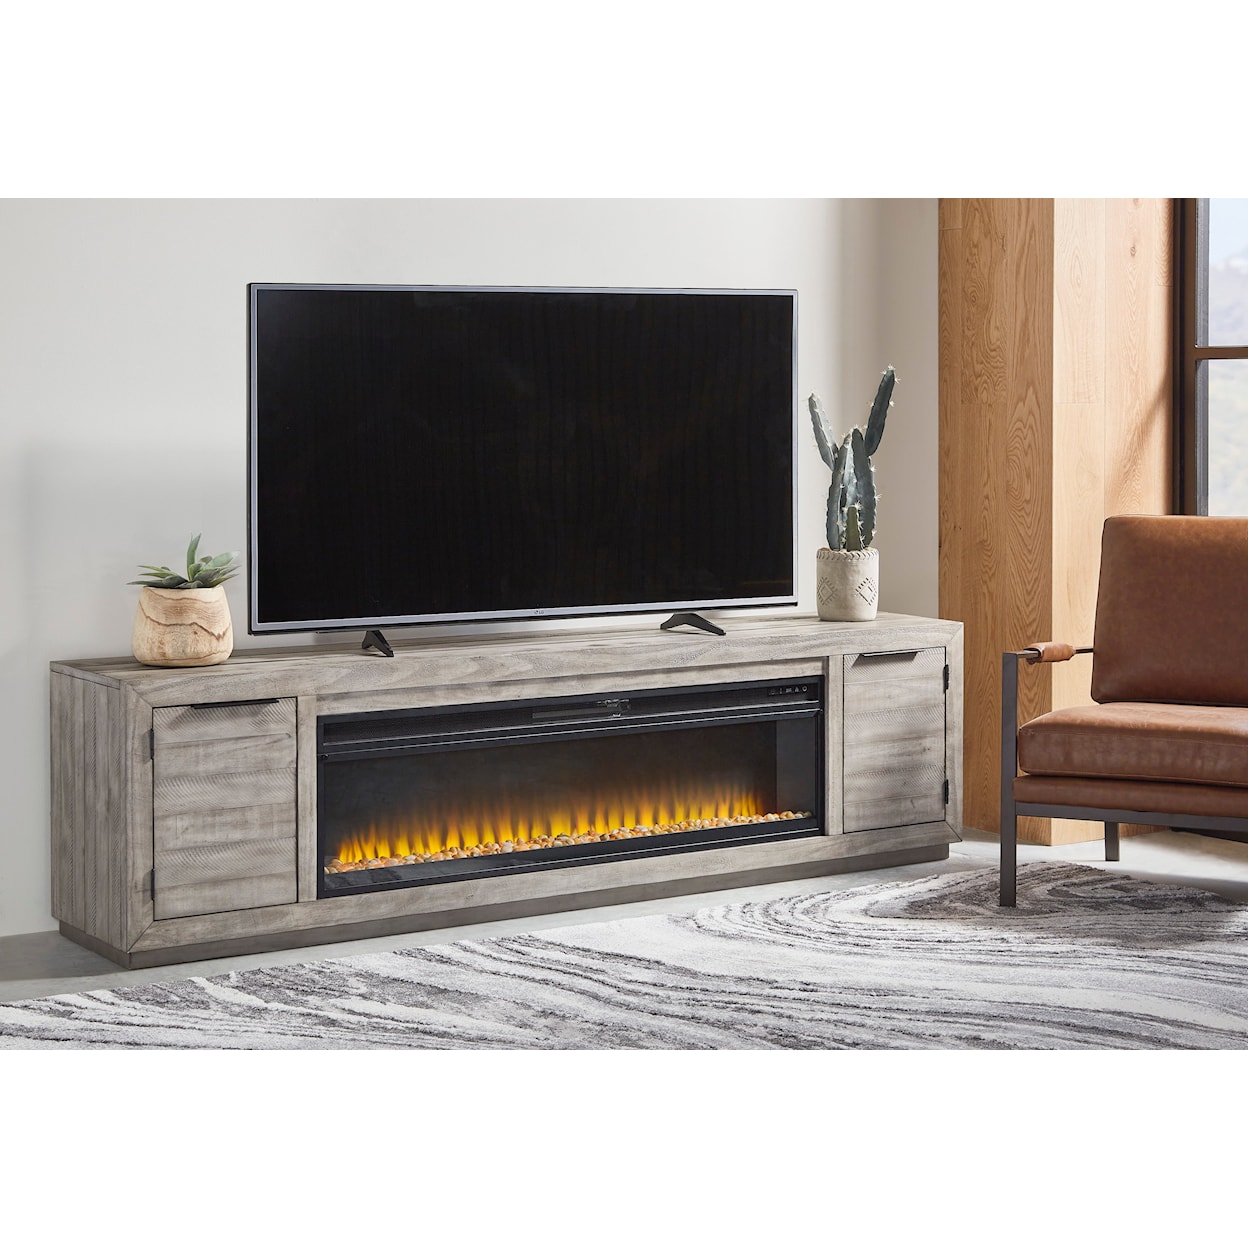 Signature Design by Ashley Furniture Naydell 92" TV Stand with Electric Fireplace